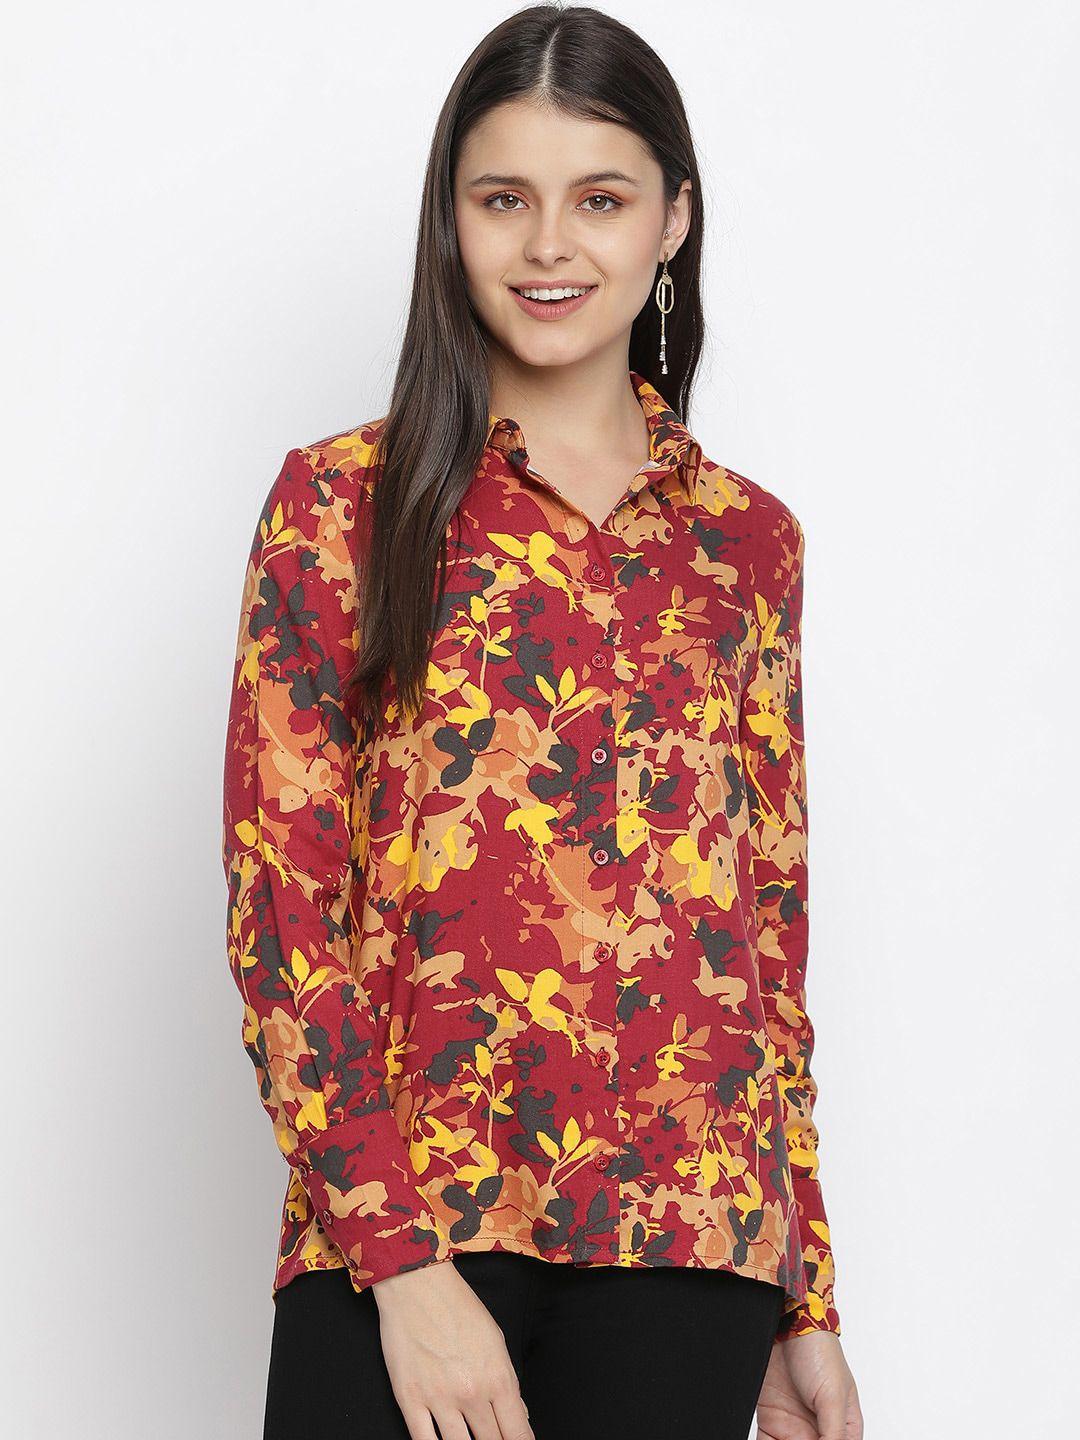 oxolloxo women red floral opaque printed casual shirt